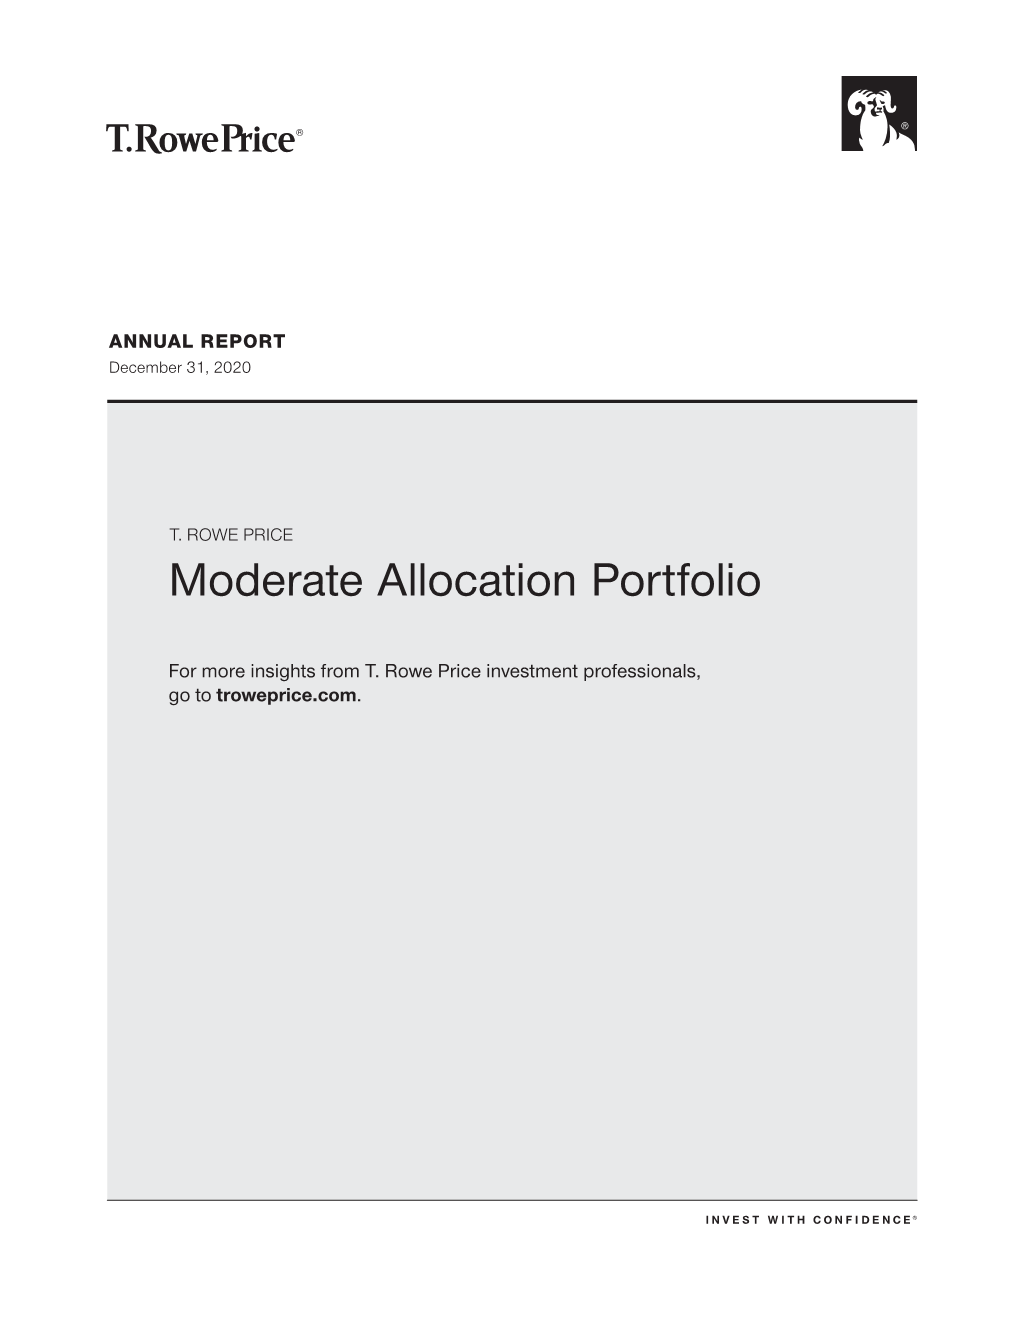 T. Rowe Price® Moderate Allocation